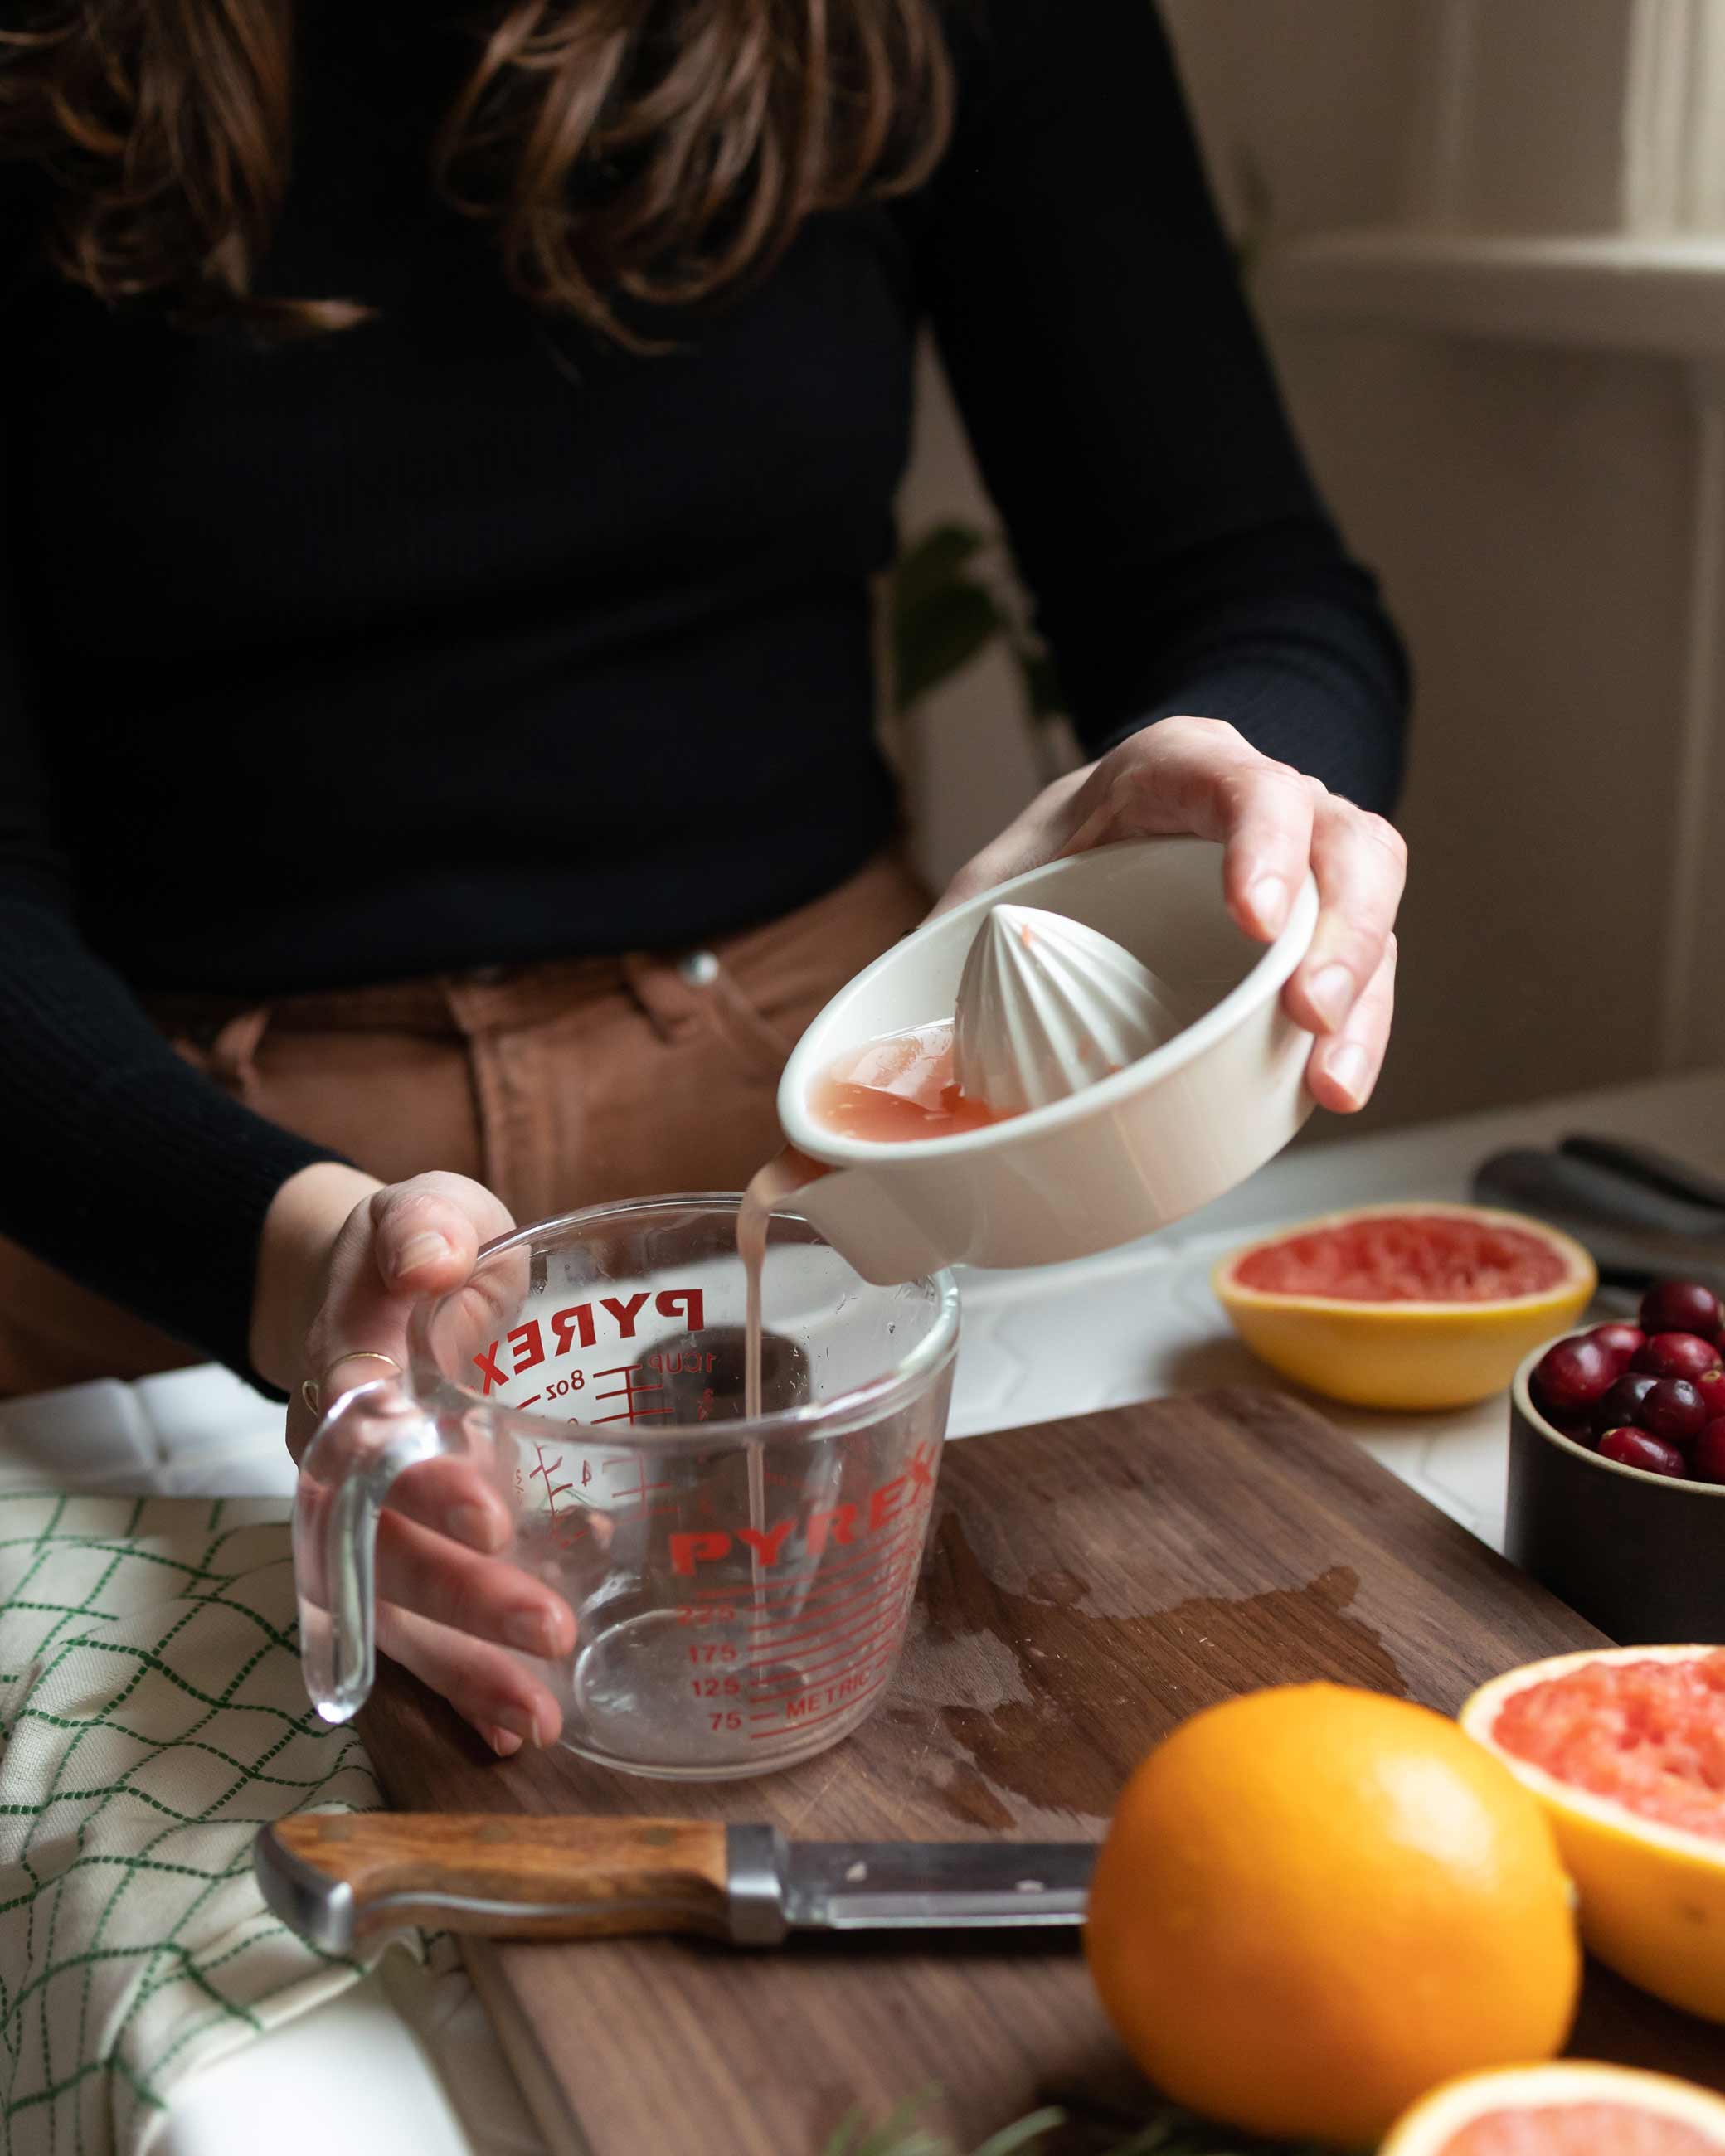 Person straining grapefruit juice into measuring cup on wood cutting board.